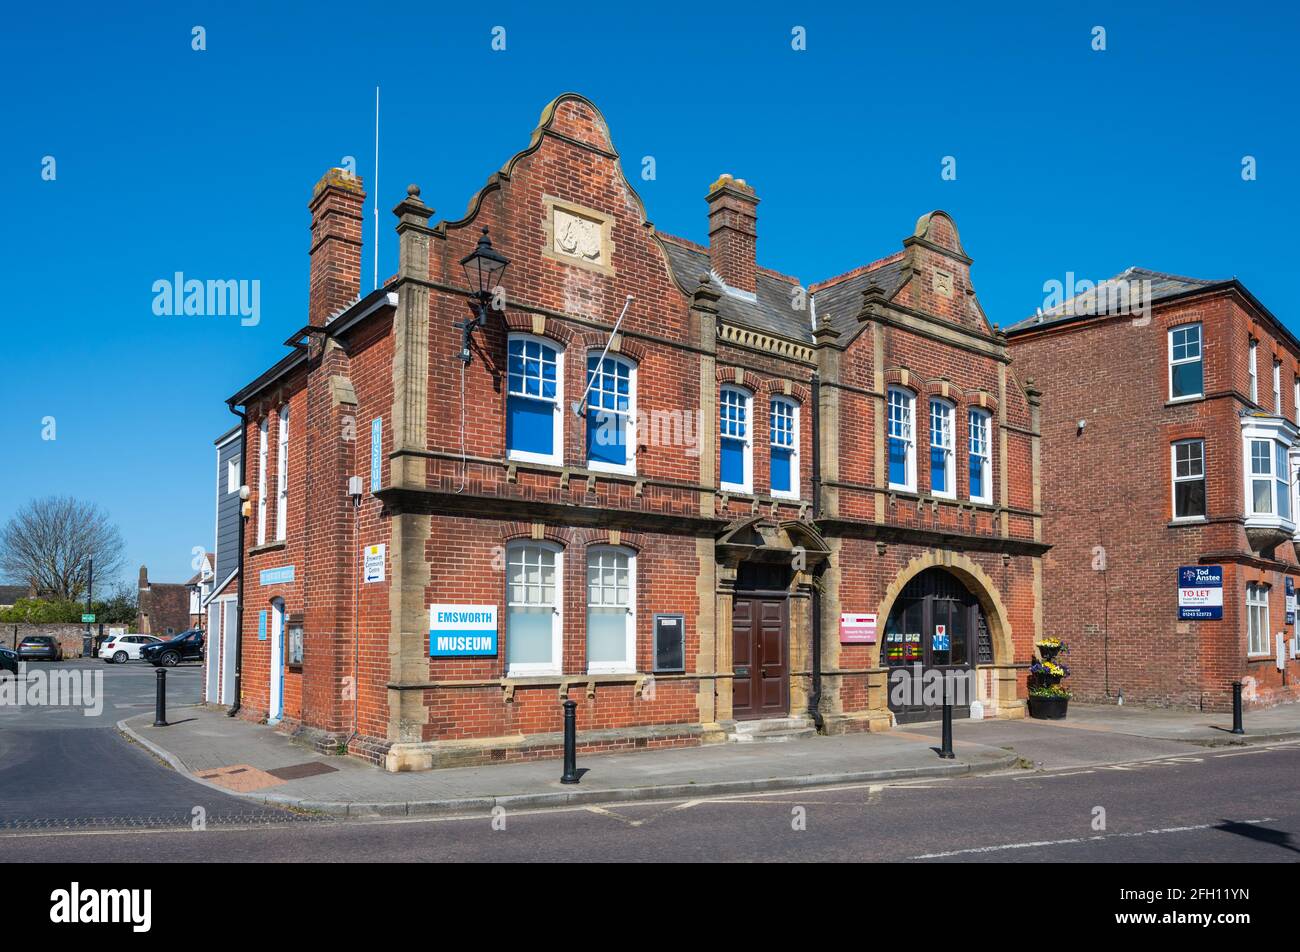 The Emsworth Museum, administered by The Emsworth Maritime & Historical Trust (EM&HT) in North Street, Emsworth, Hampshire, England, UK. Stock Photo